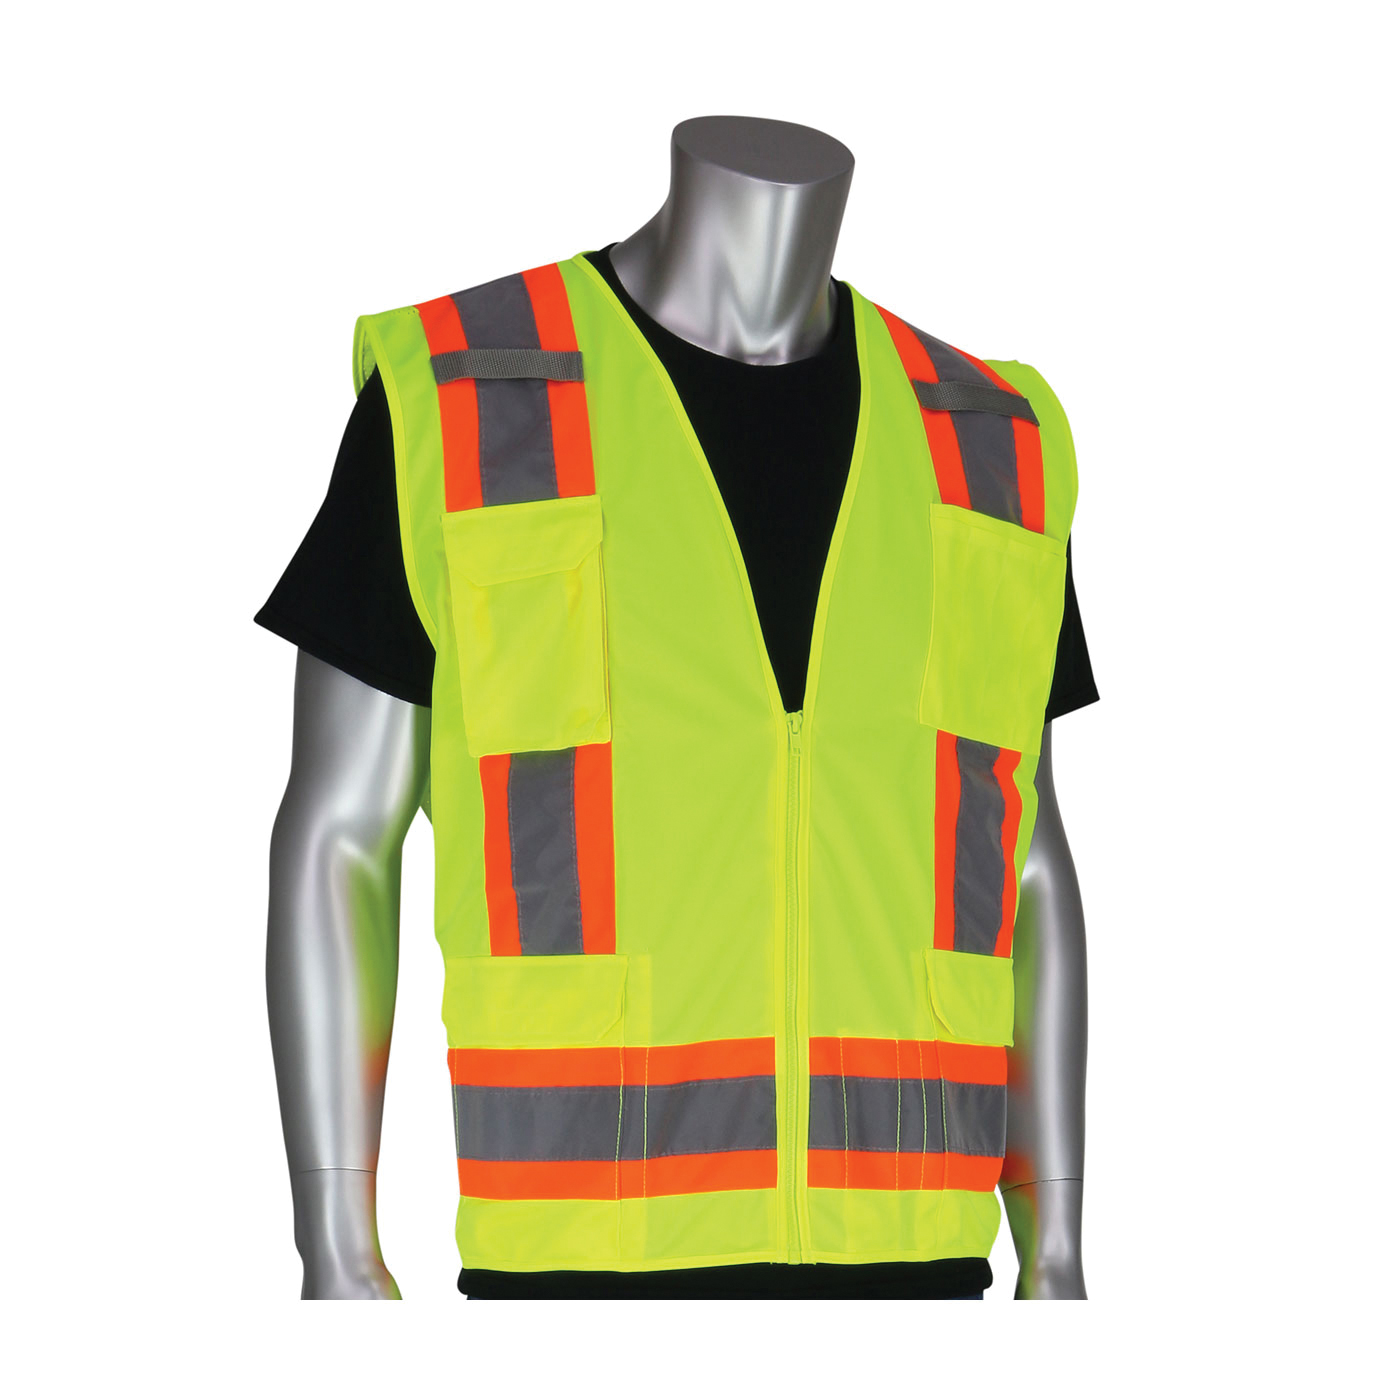 PIP® 302-0500S-YEL/5X 2-Tone Surveyor Safety Vest, 5XL, Hi-Viz Lime Yellow, Polyester/Solid Tricot, Zipper Closure, 11 Pockets, ANSI Class: Class 2, Specifications Met: ANSI 107 Type R